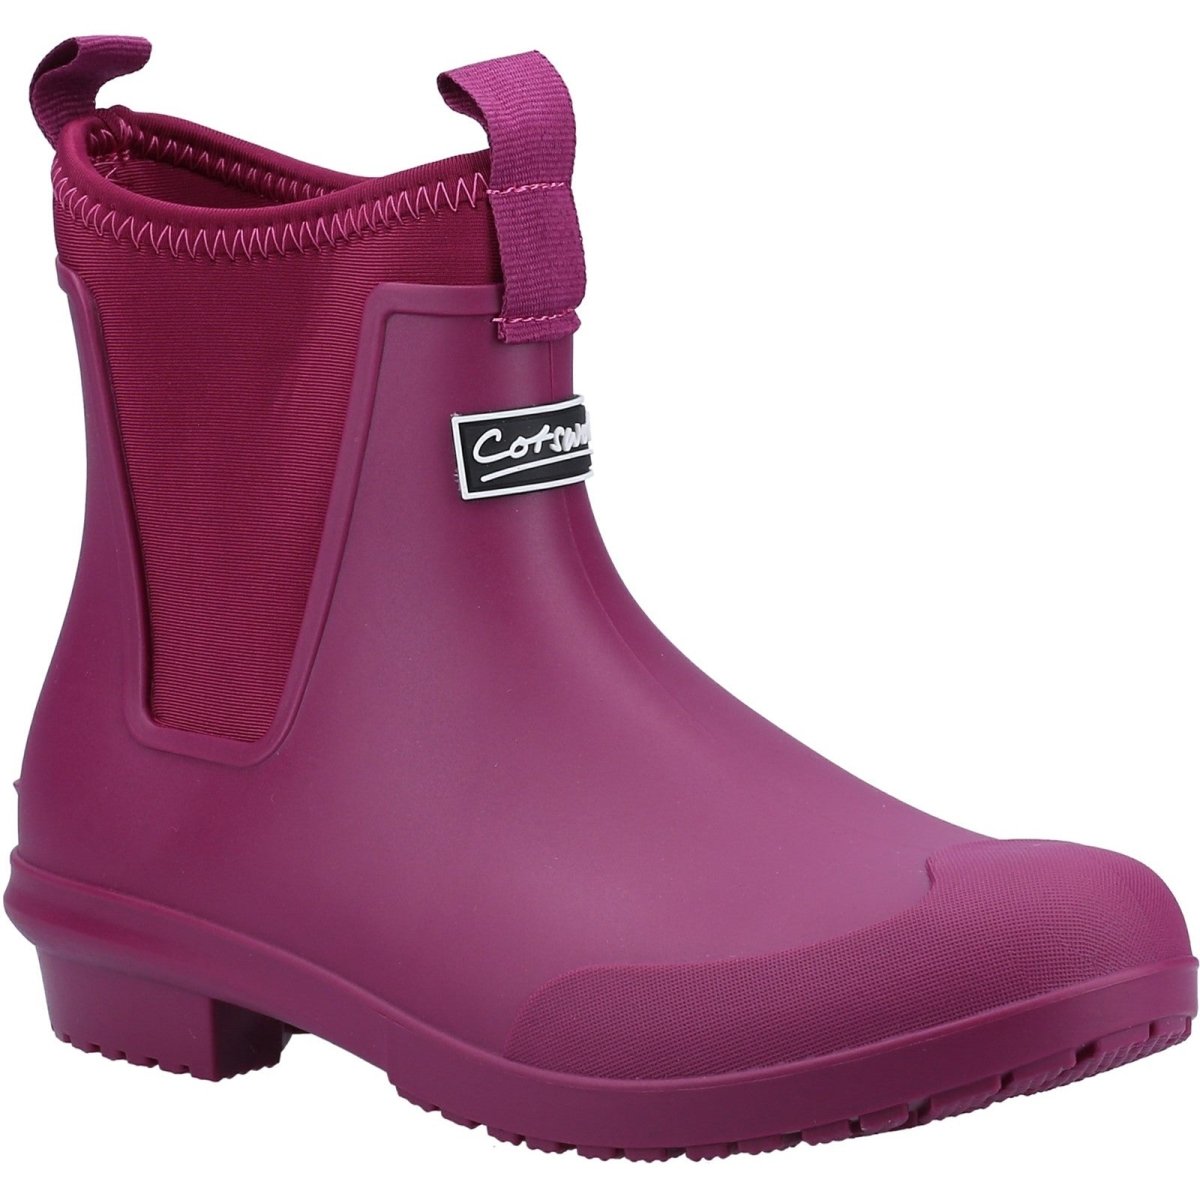 Cotswold Grosvenor Ladies Ankle Wellington Boots - Shoe Store Direct